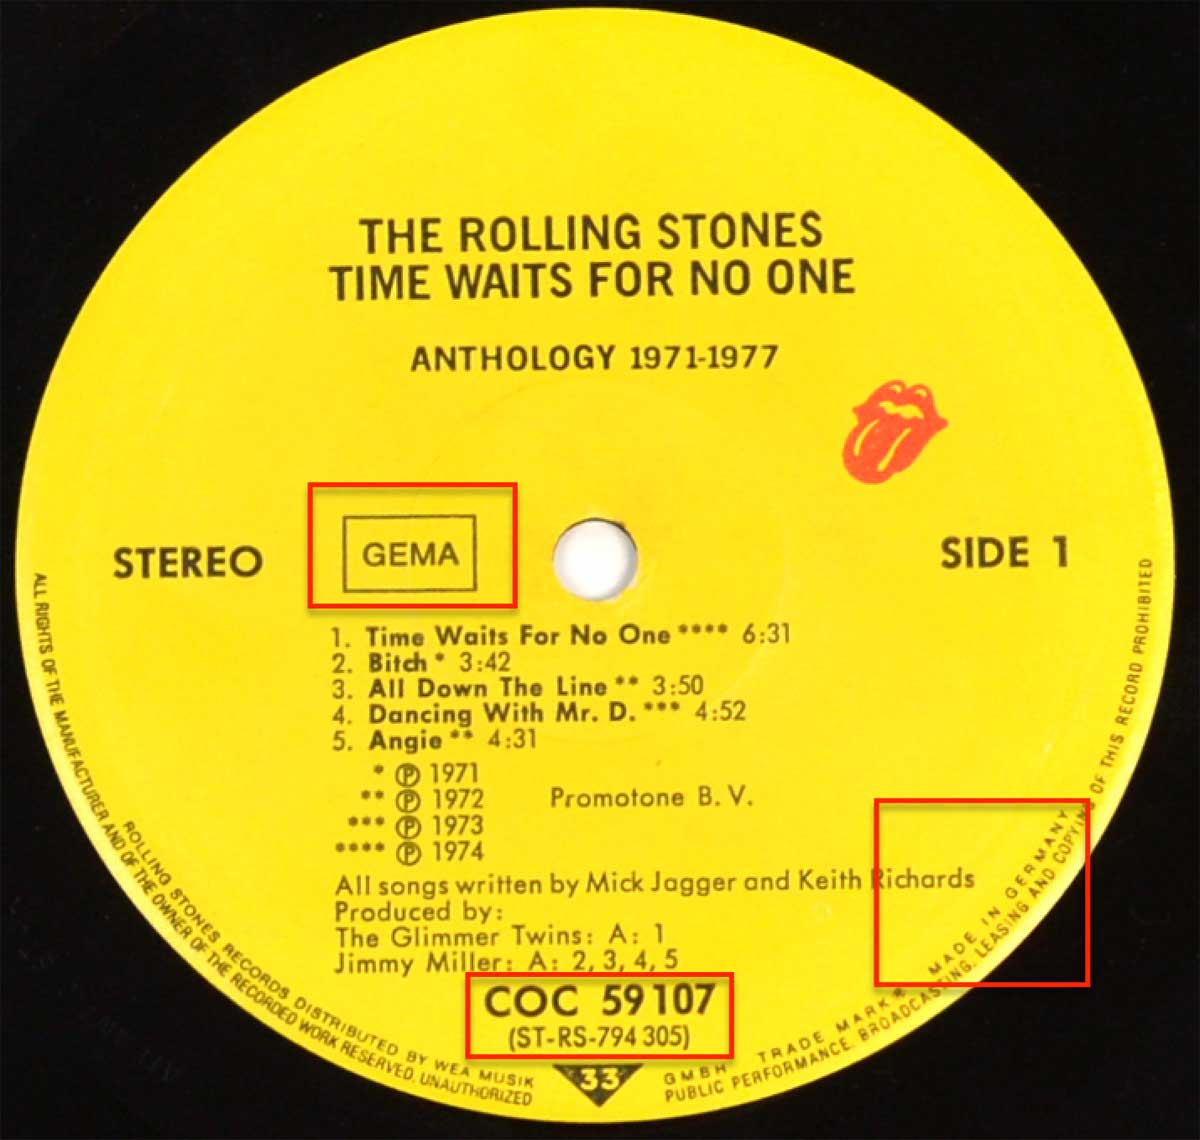 Enlarged & Zoomed photo of "ROLLING STONES Time Waits For No One (Anthology 1971-1977)" Record's Label